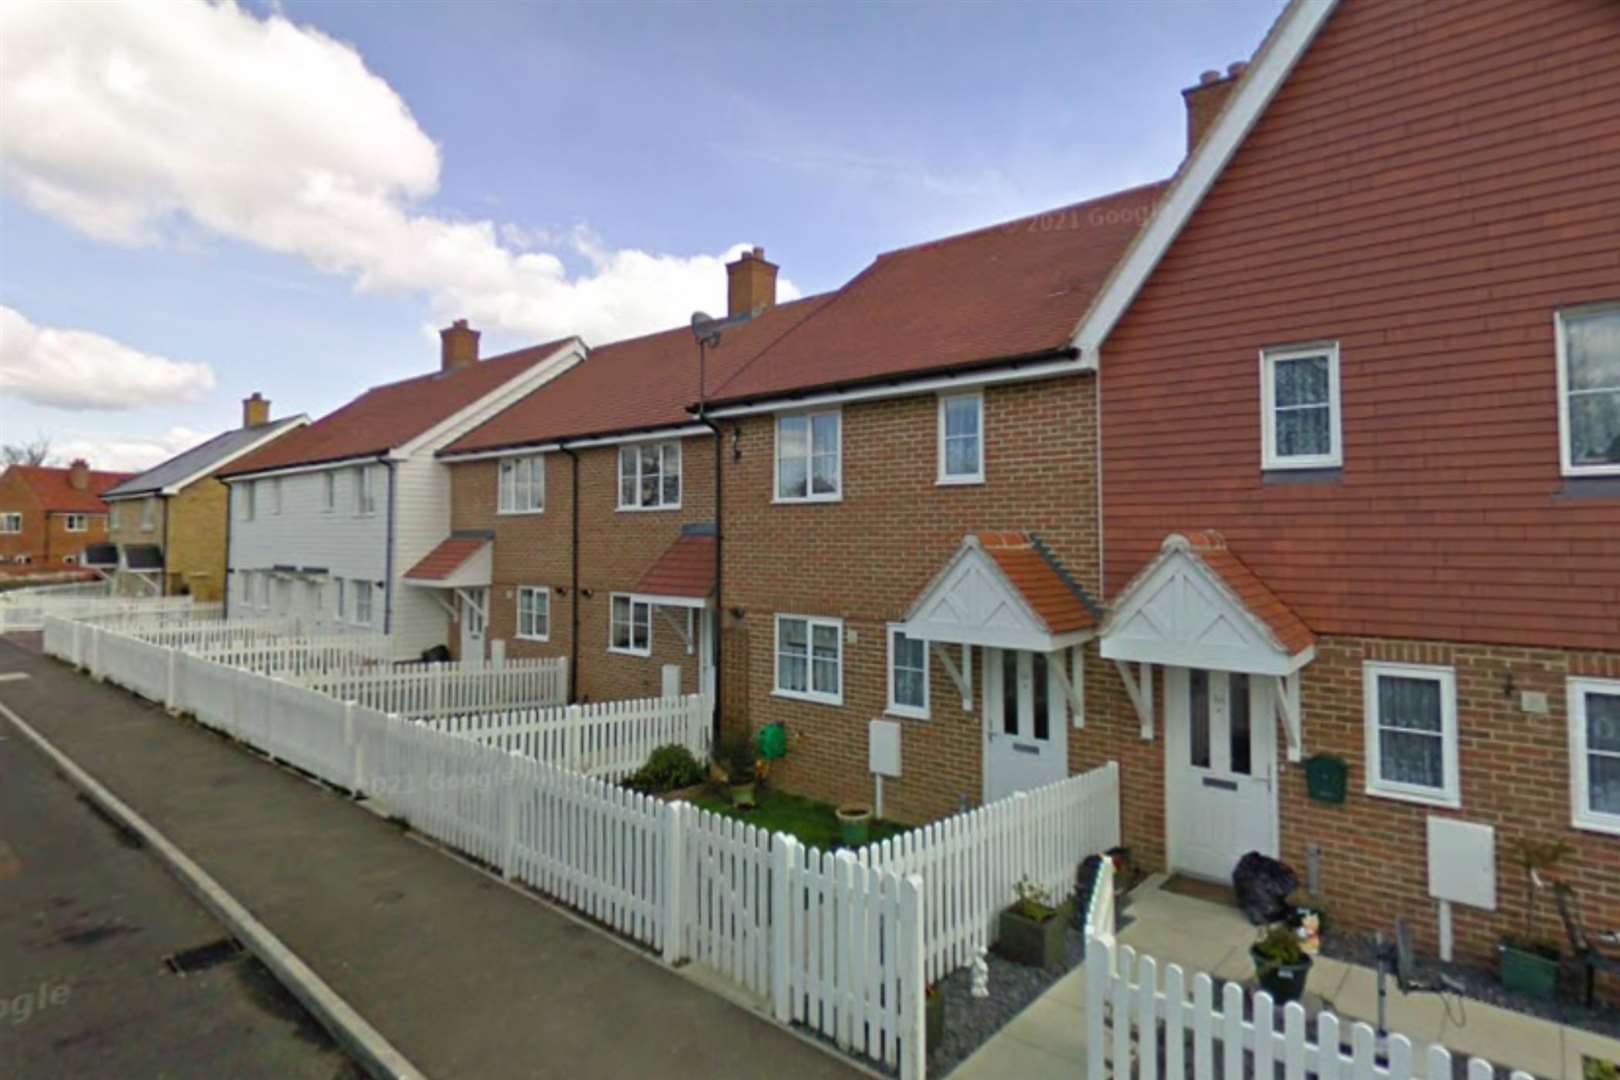 A garden shed at a home in Sandeman Way was set on fire. Picture: Google